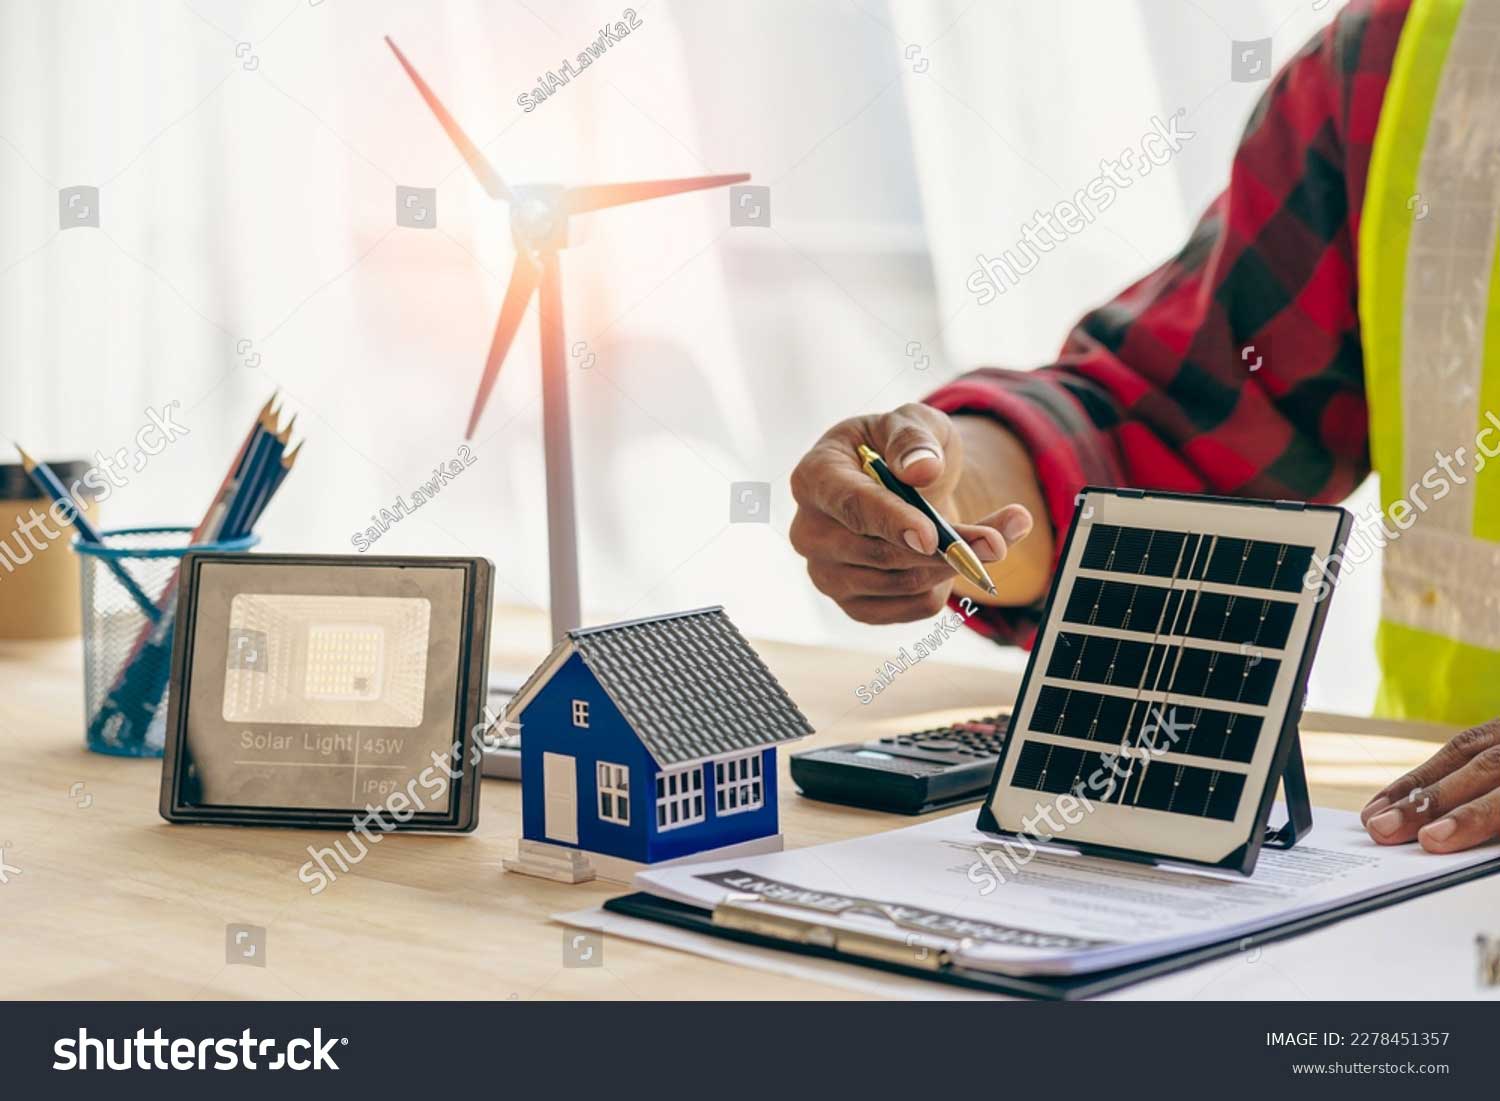 stock photo engineer working in office at desk with solar laptop and concept home design solar renewable energy 2278451357